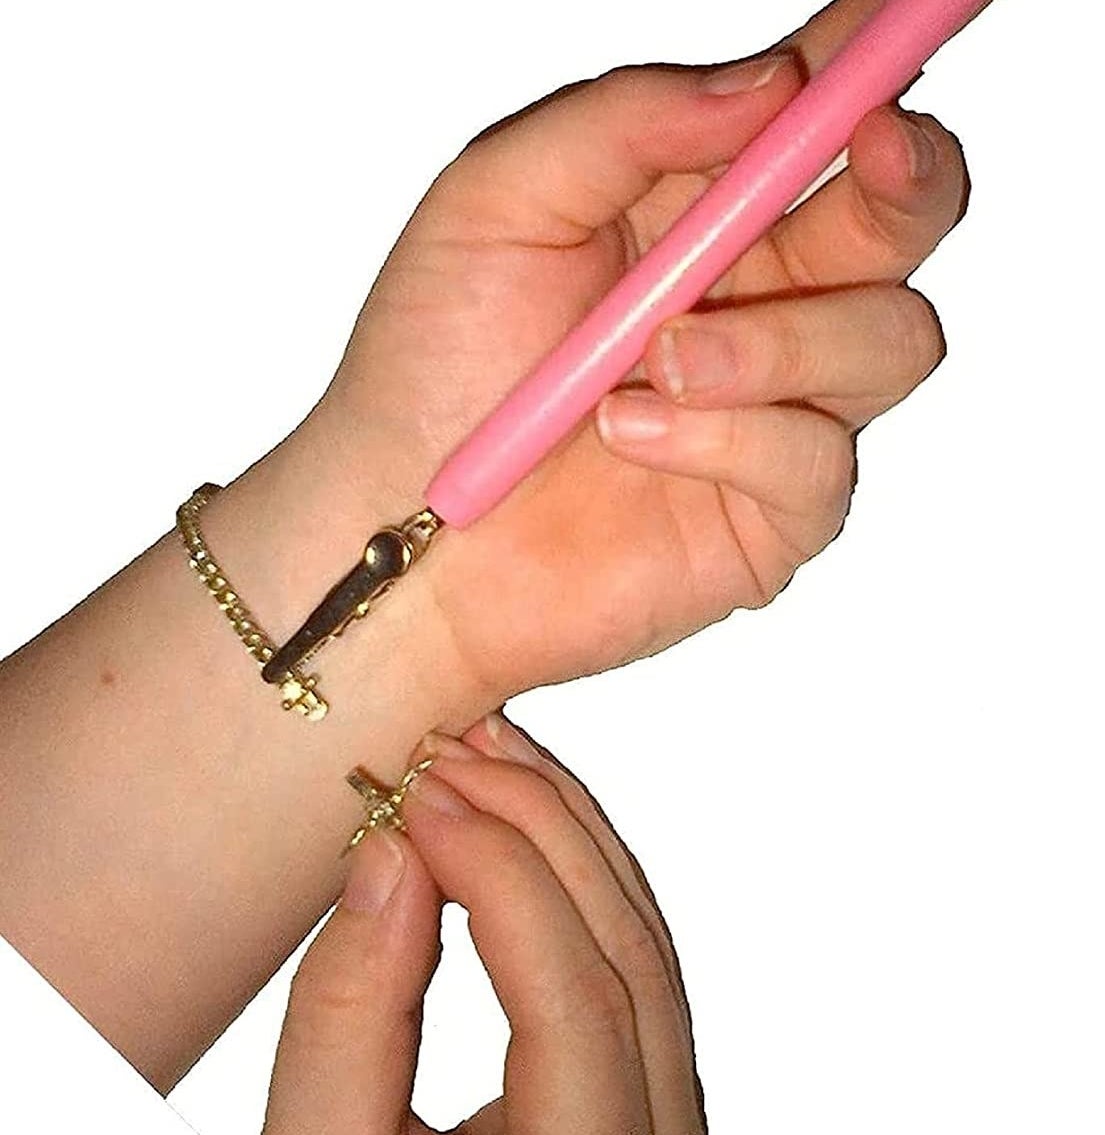 Model using the tool to put on a small bracelet by themselves